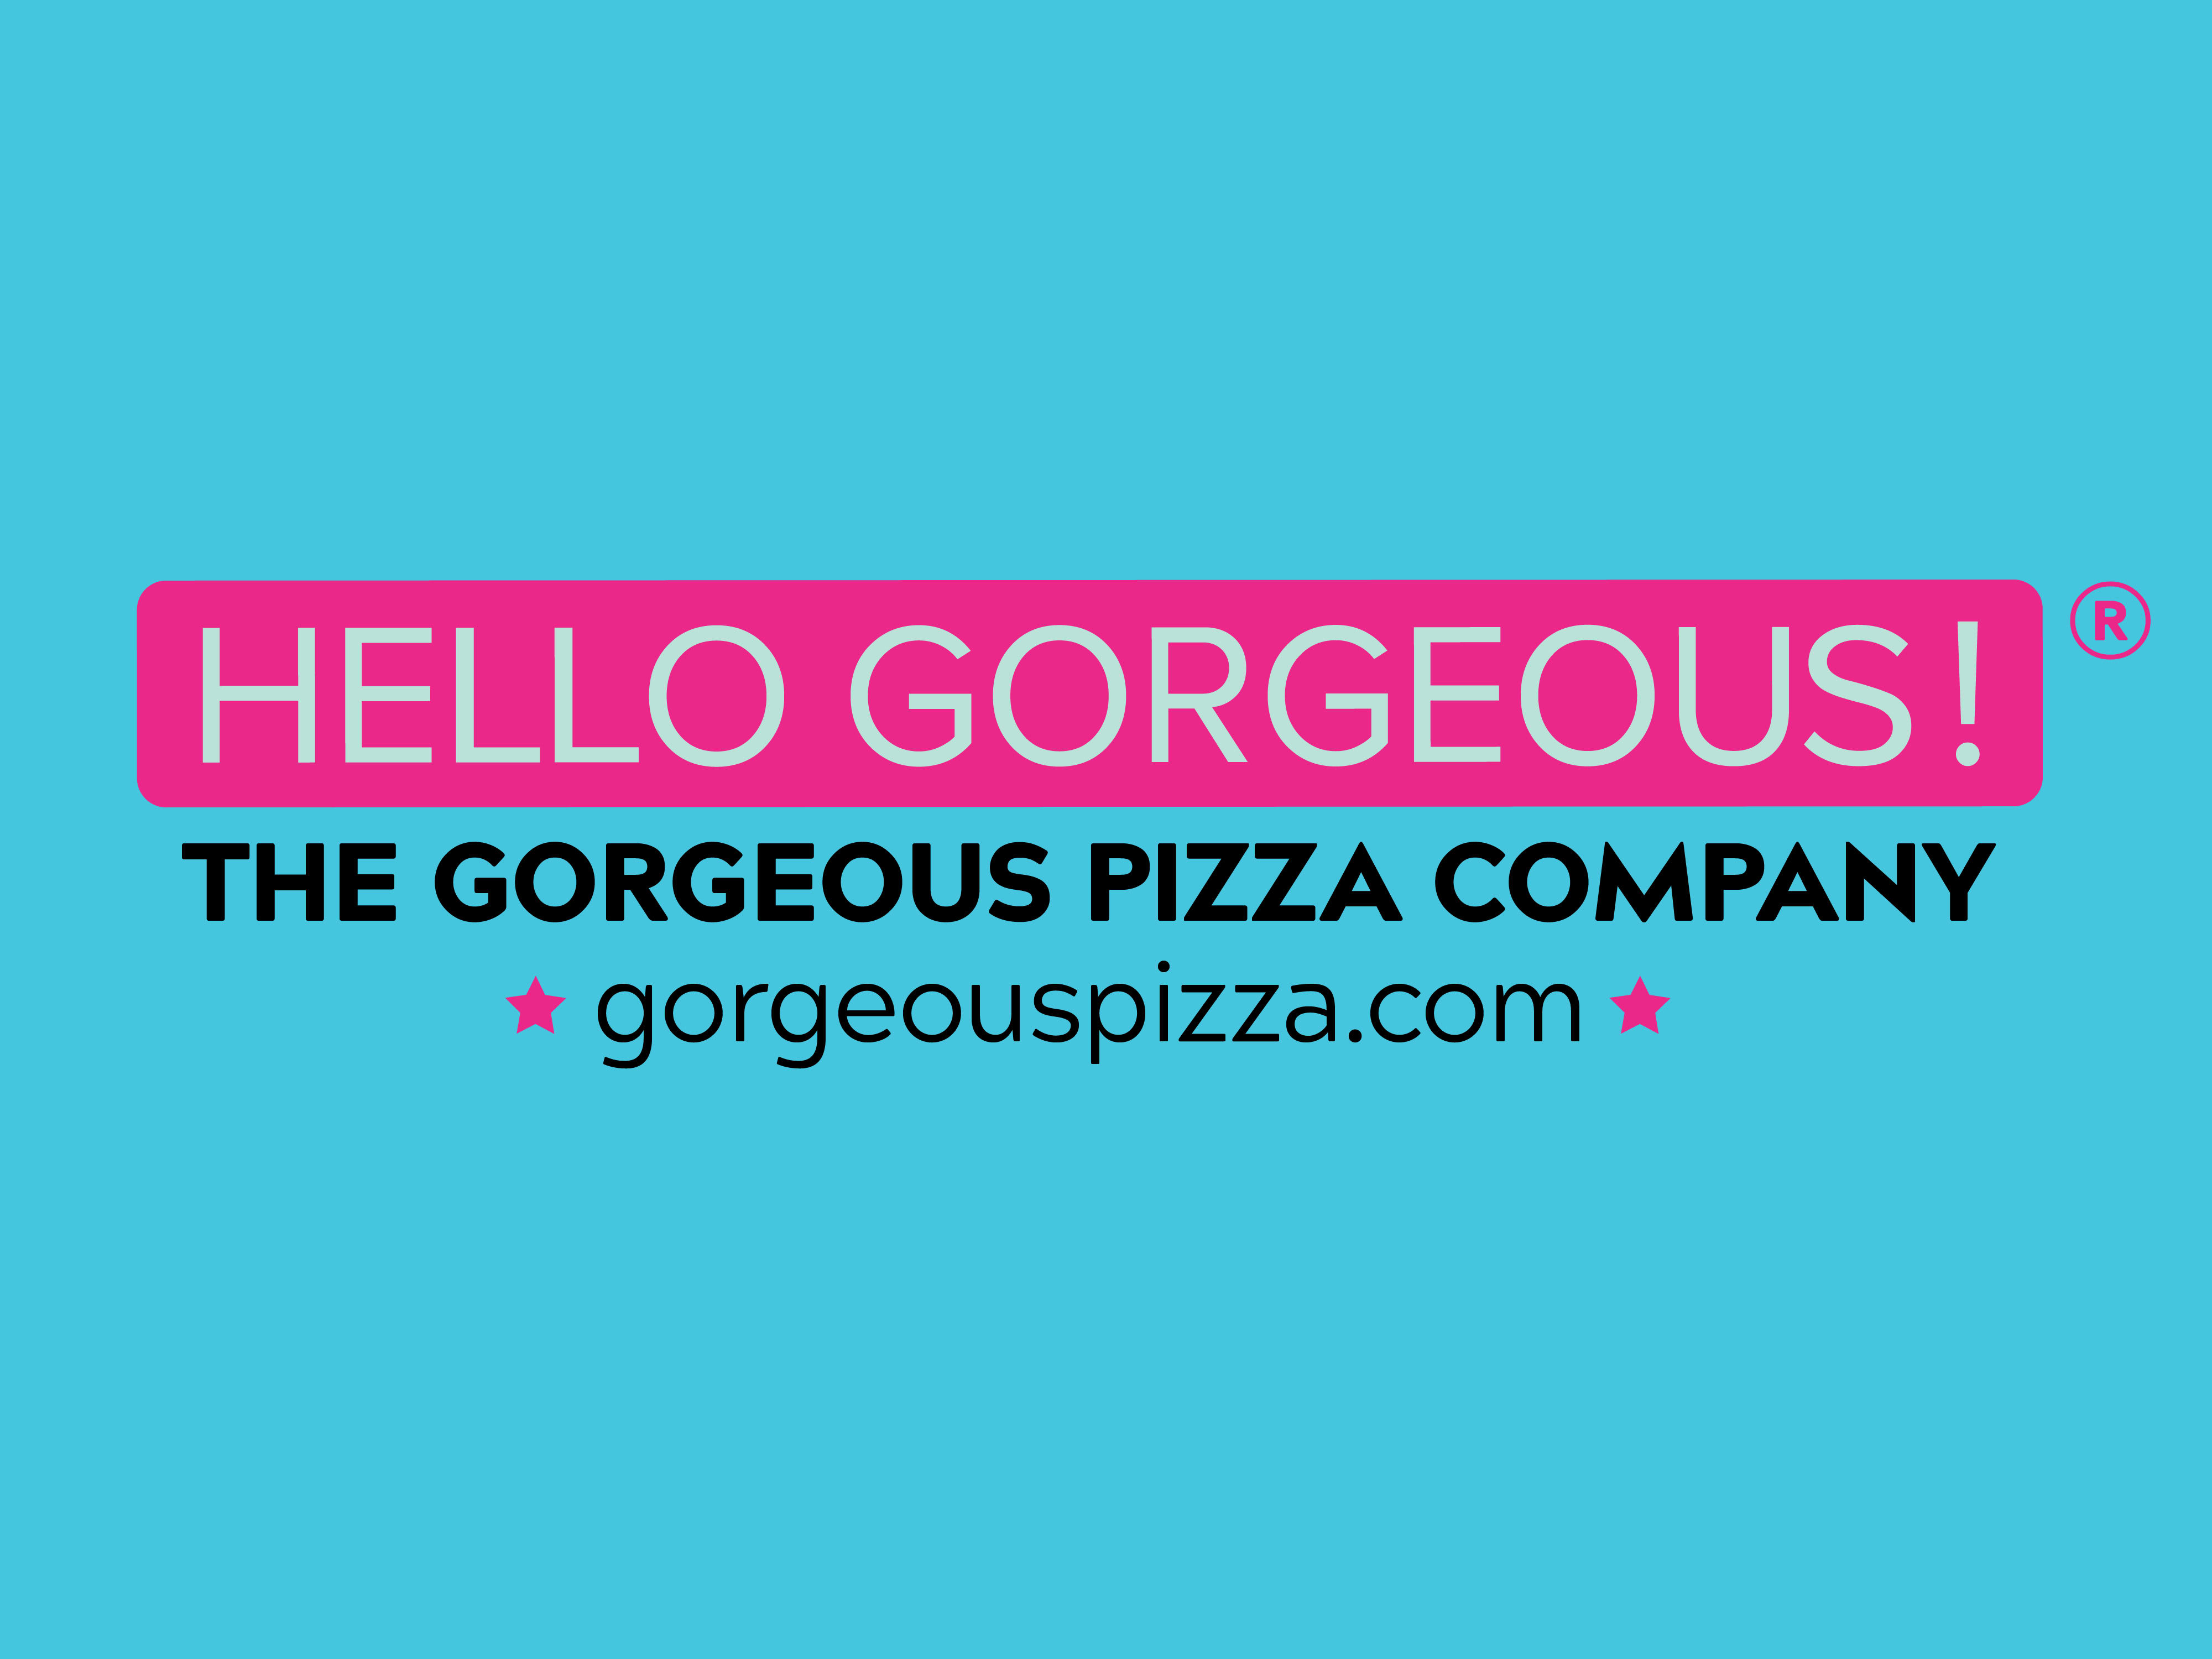 The Gorgeous Pizza Company